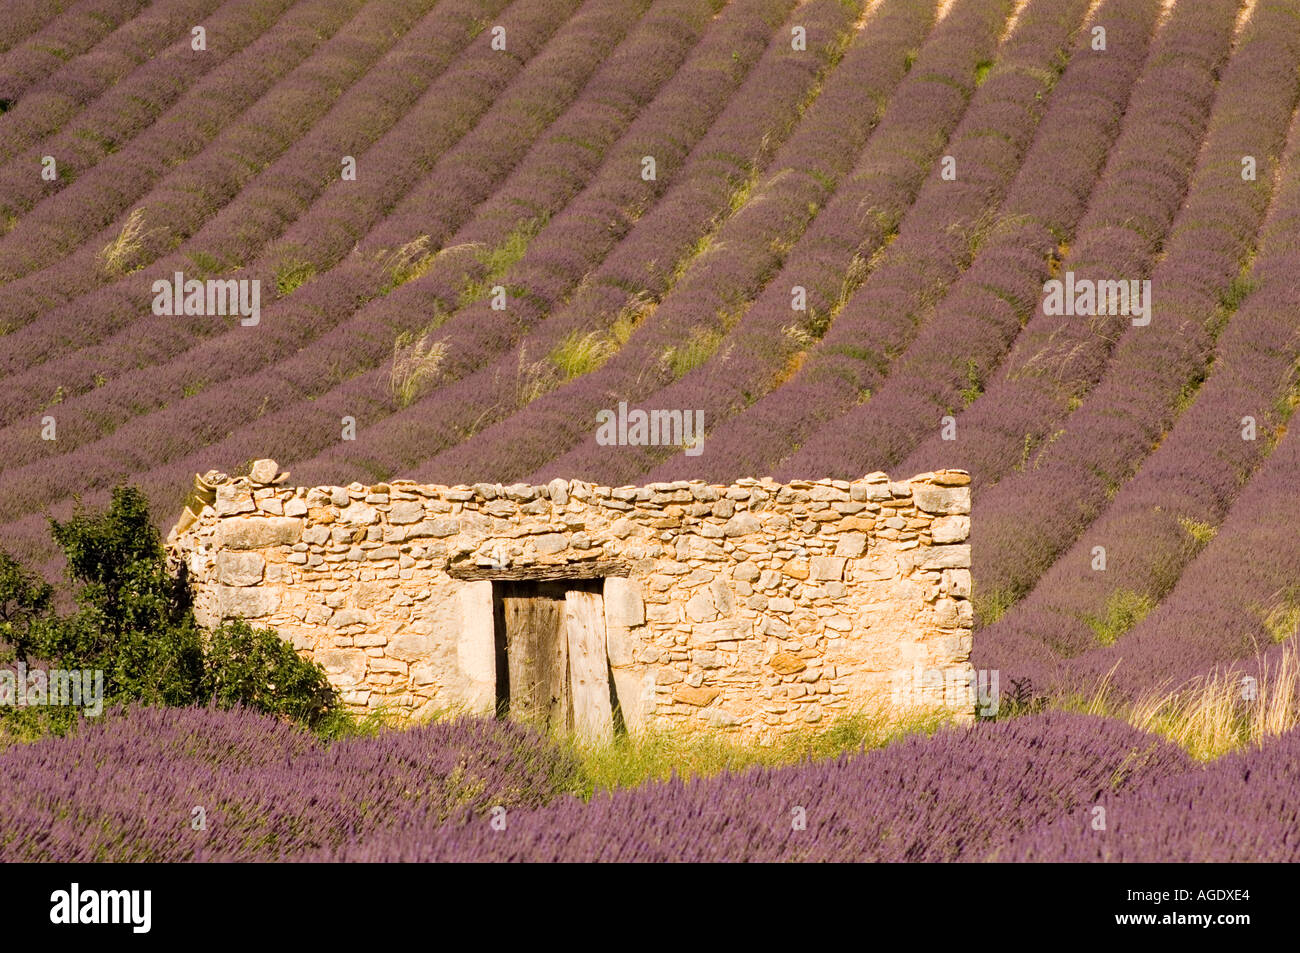 France Provence Sult area Lavender fields and stone bulding Stock Photo